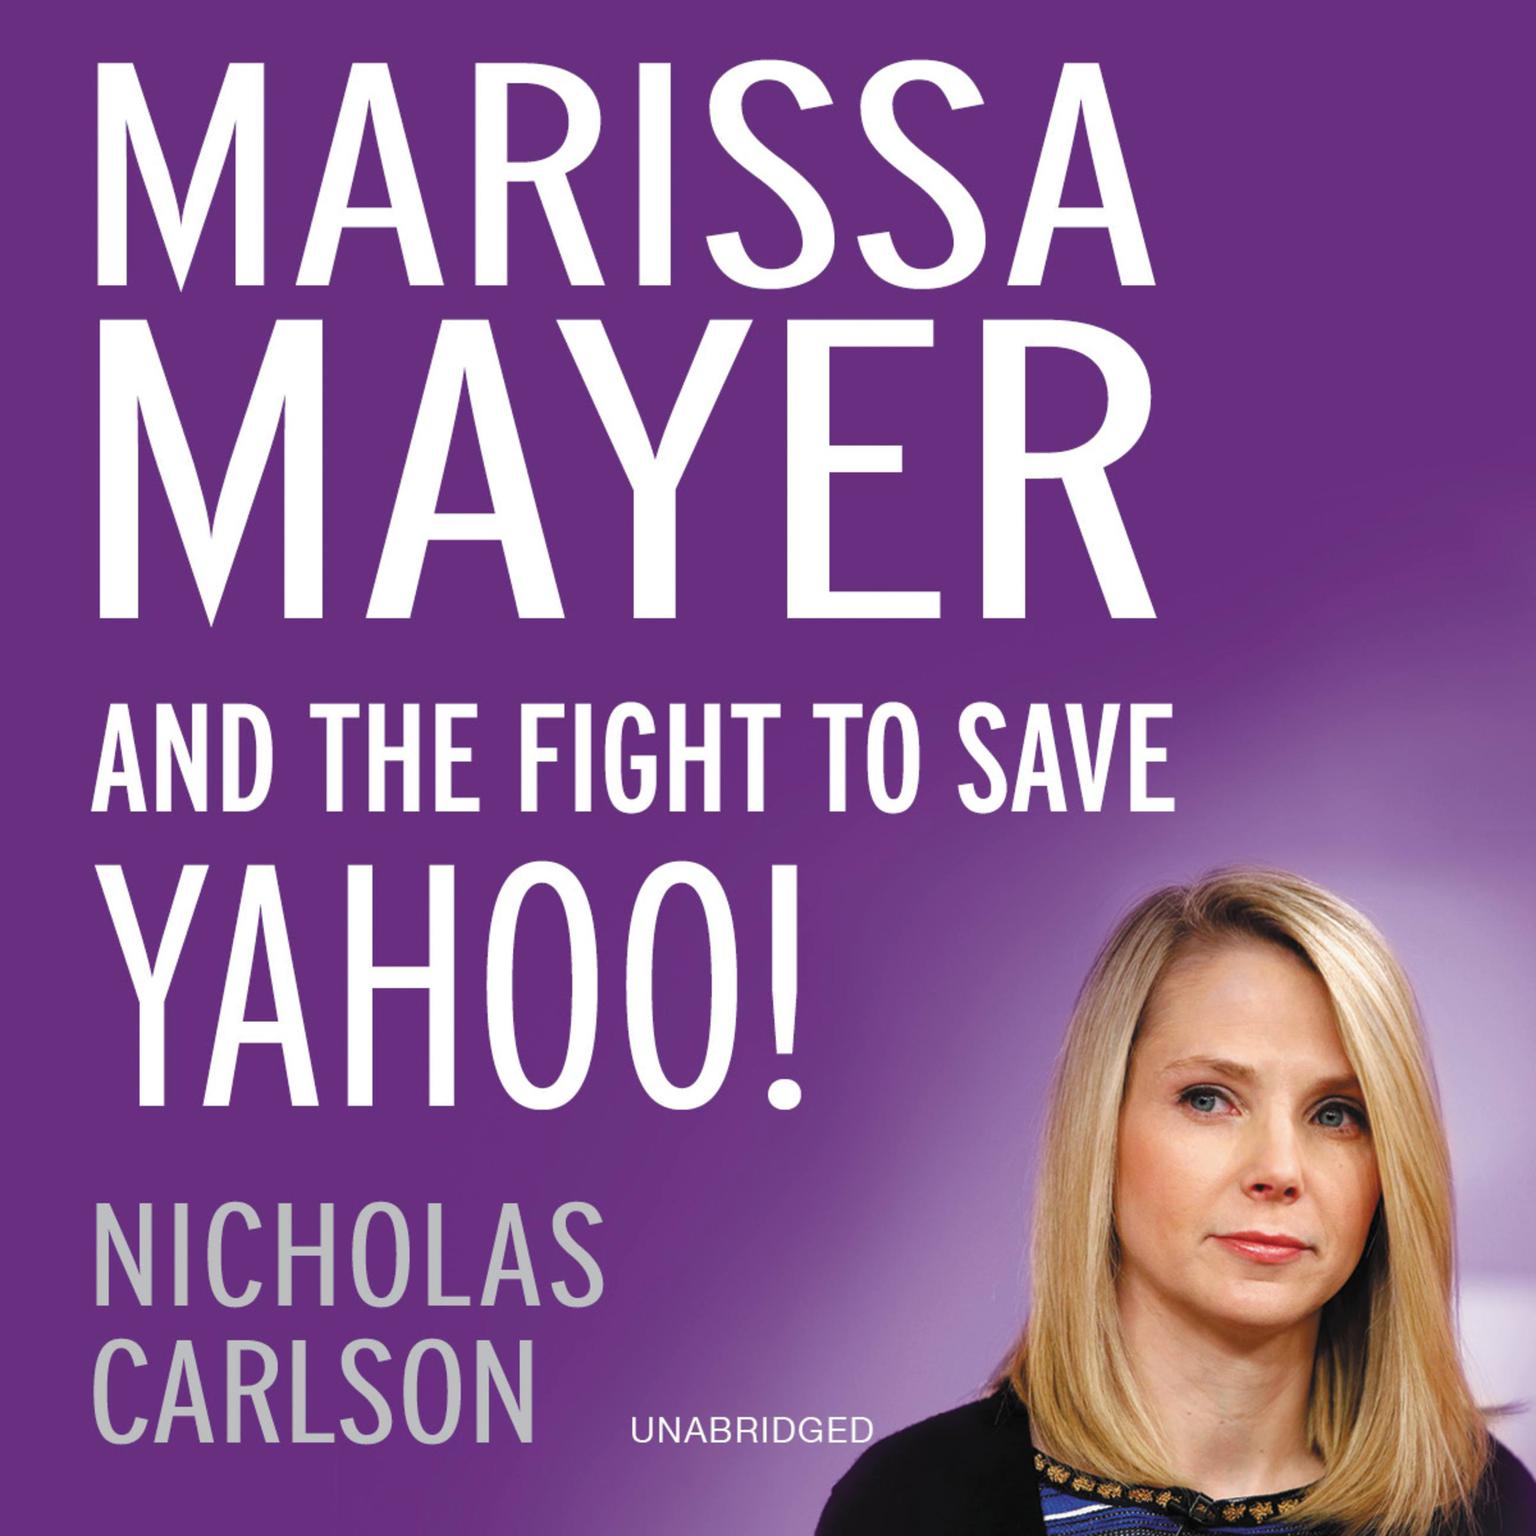 Marissa Mayer and the Fight to Save Yahoo! Audiobook, by Nicholas Carlson